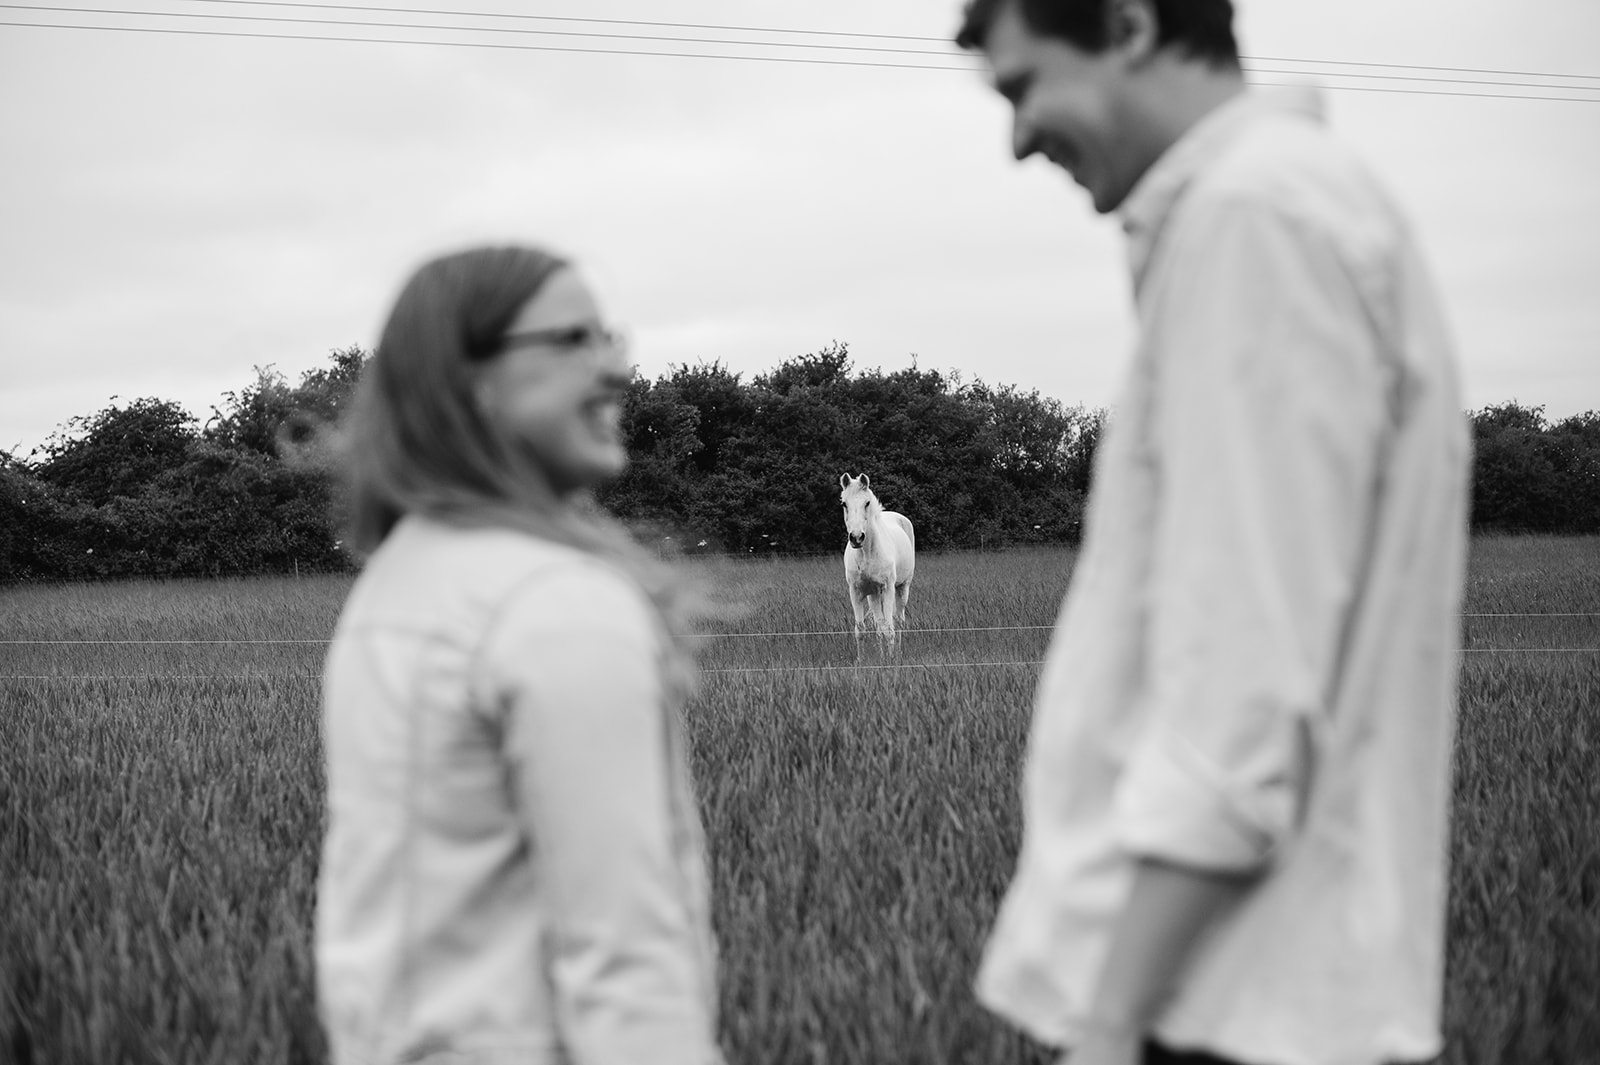 The couple are blurred in the foreground with a white horse framed between them in focus at the middle of the image